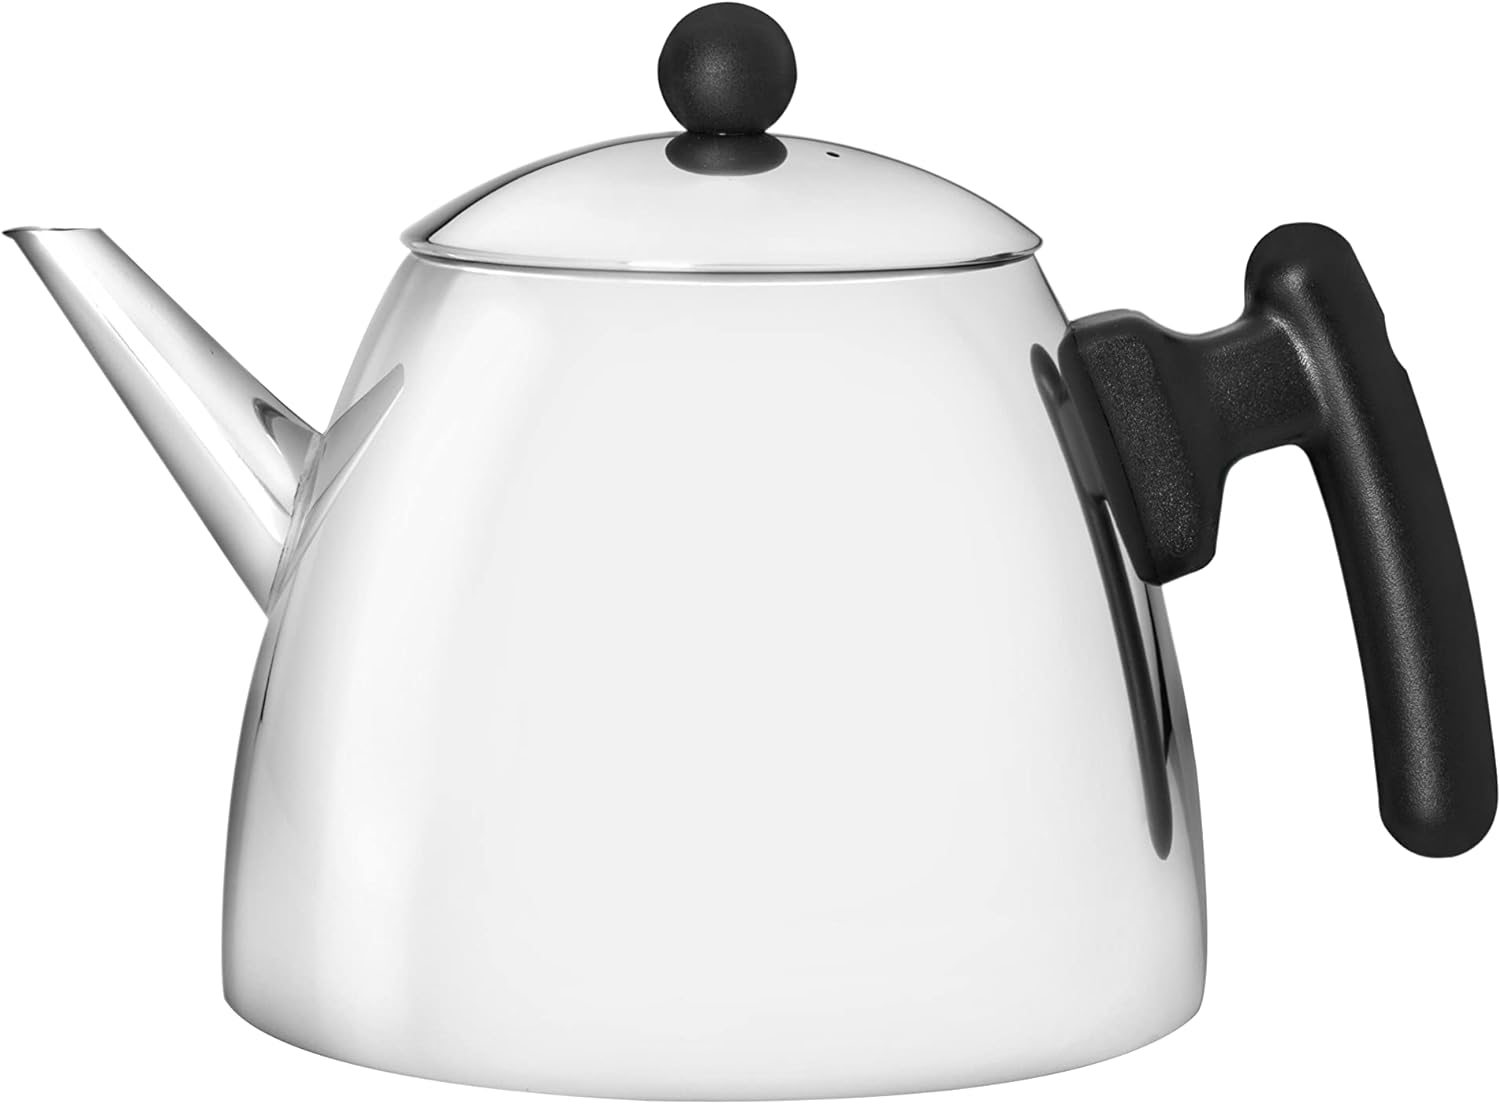 Bredemeijer Classic Double Wall Stainless Steel Teapot 1.2 Liter Black Handle